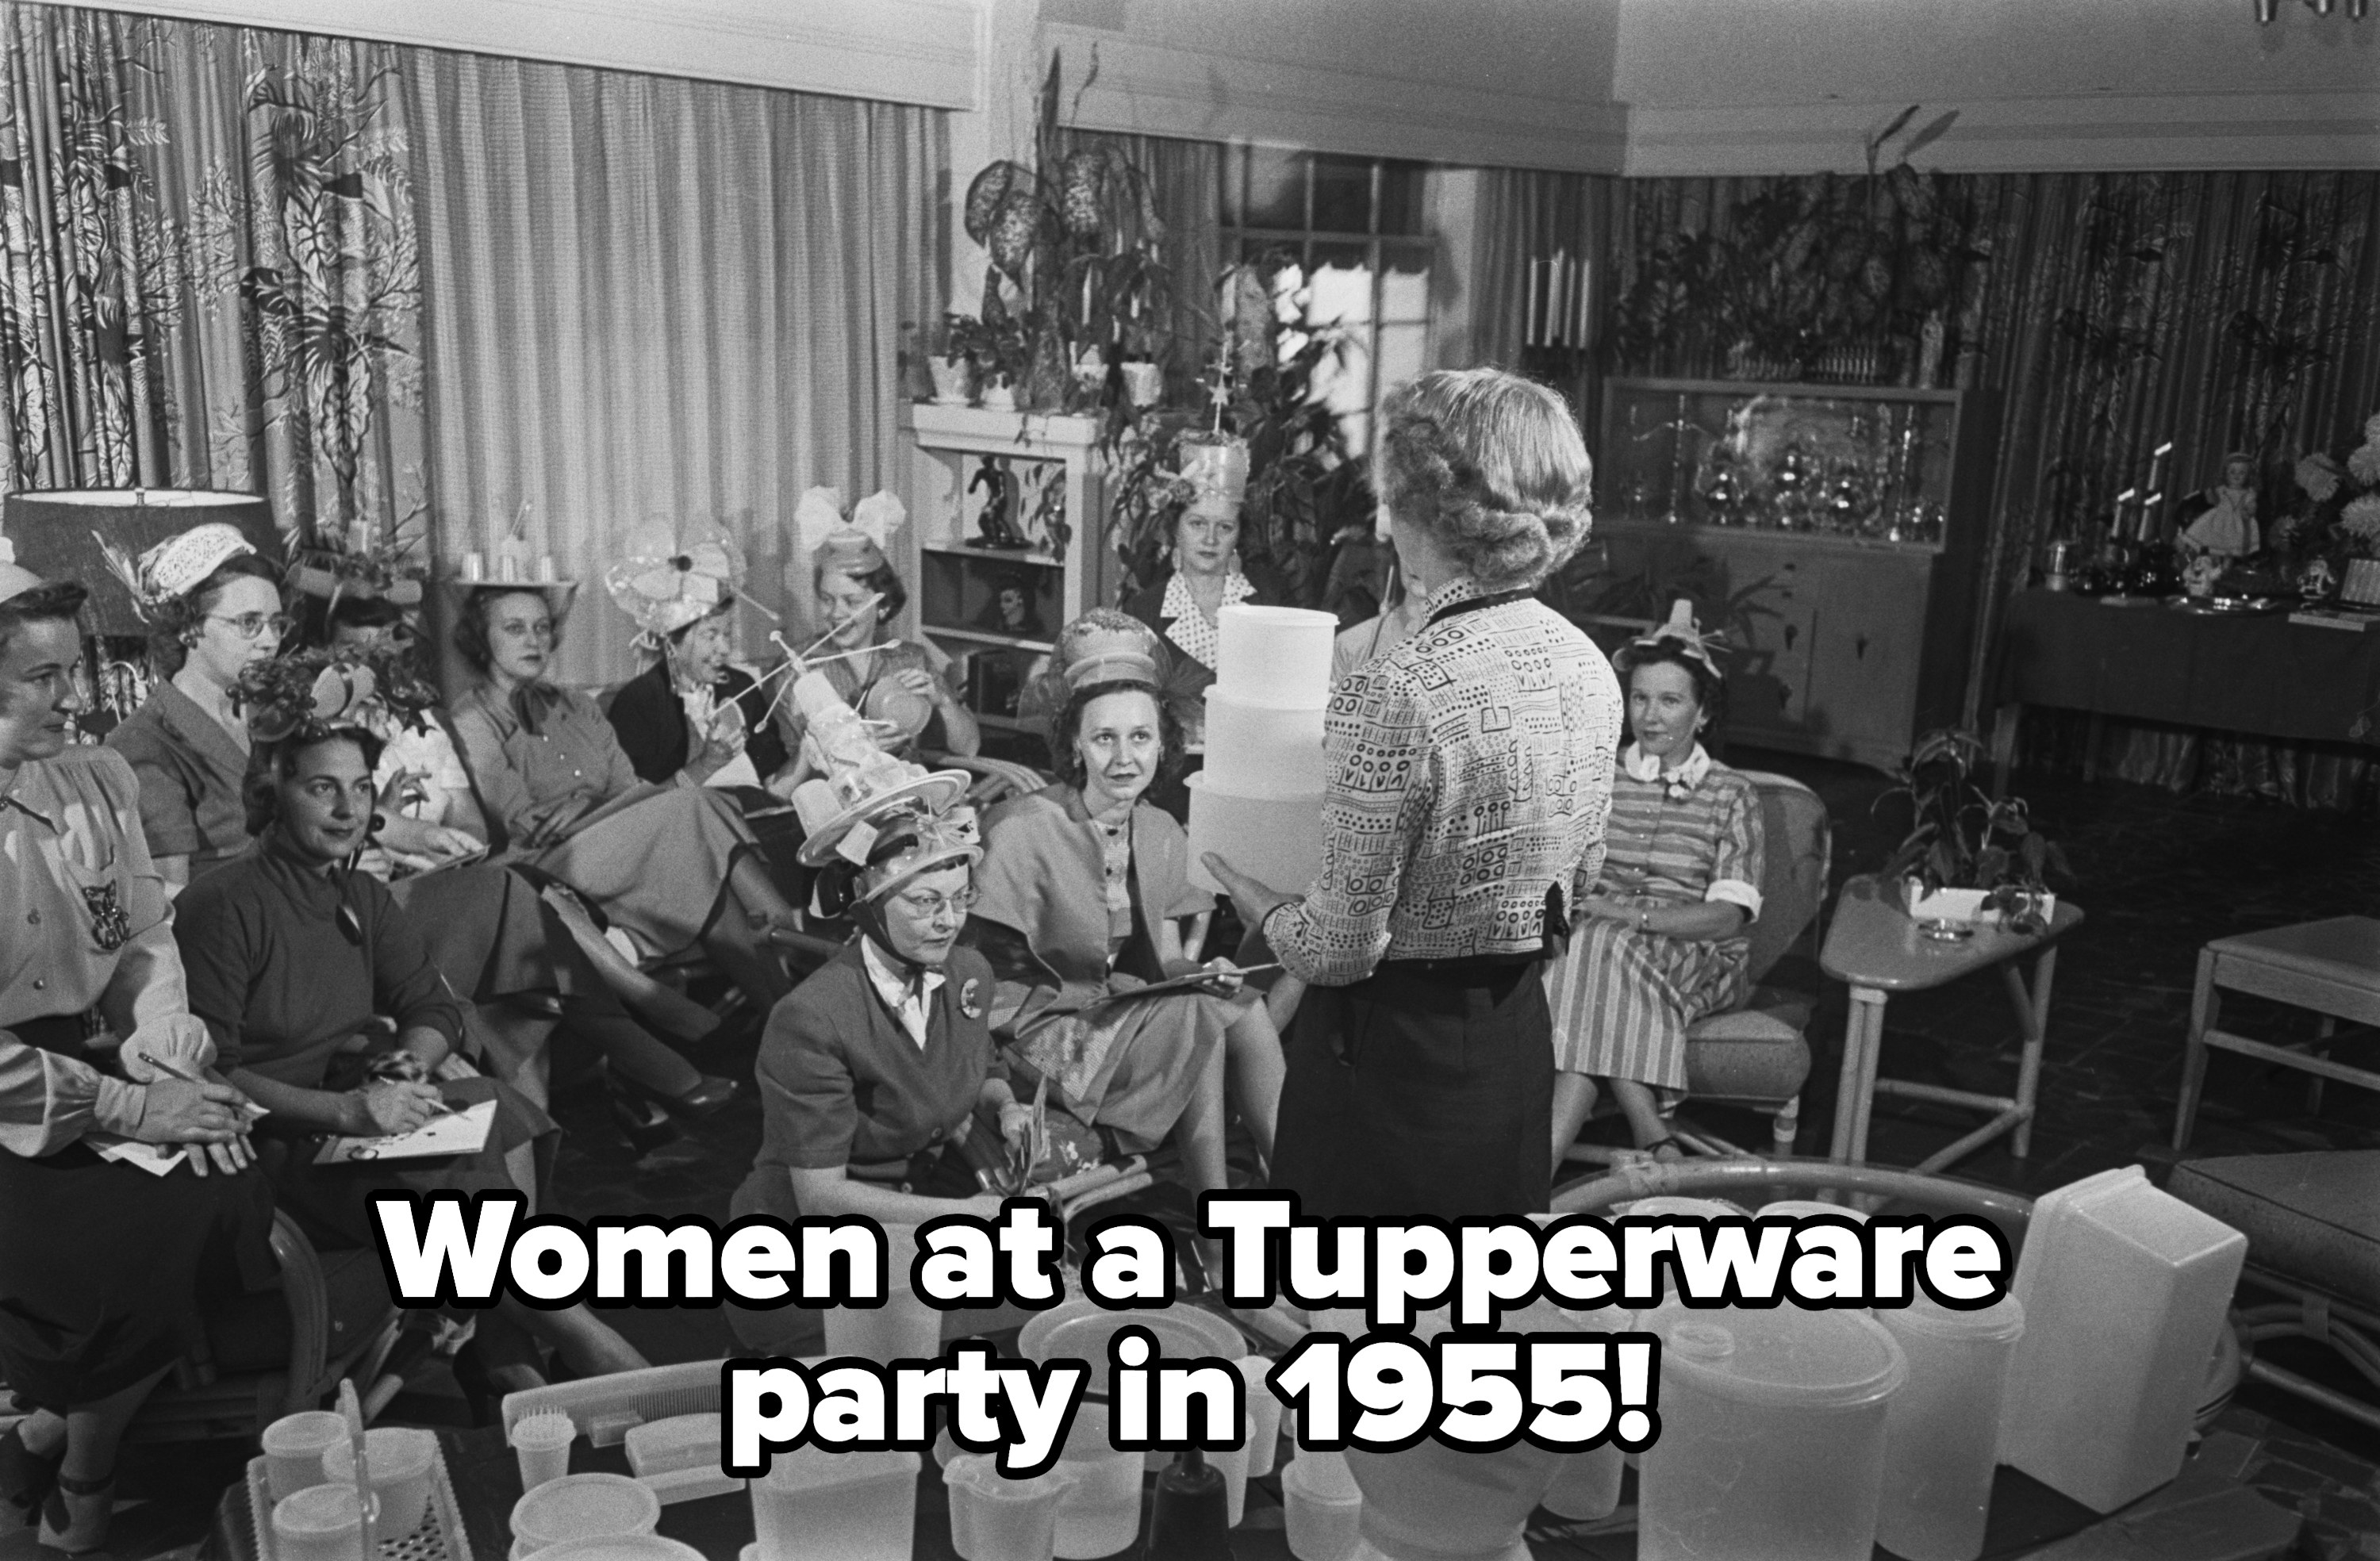 Women at a tupperware party in 1955